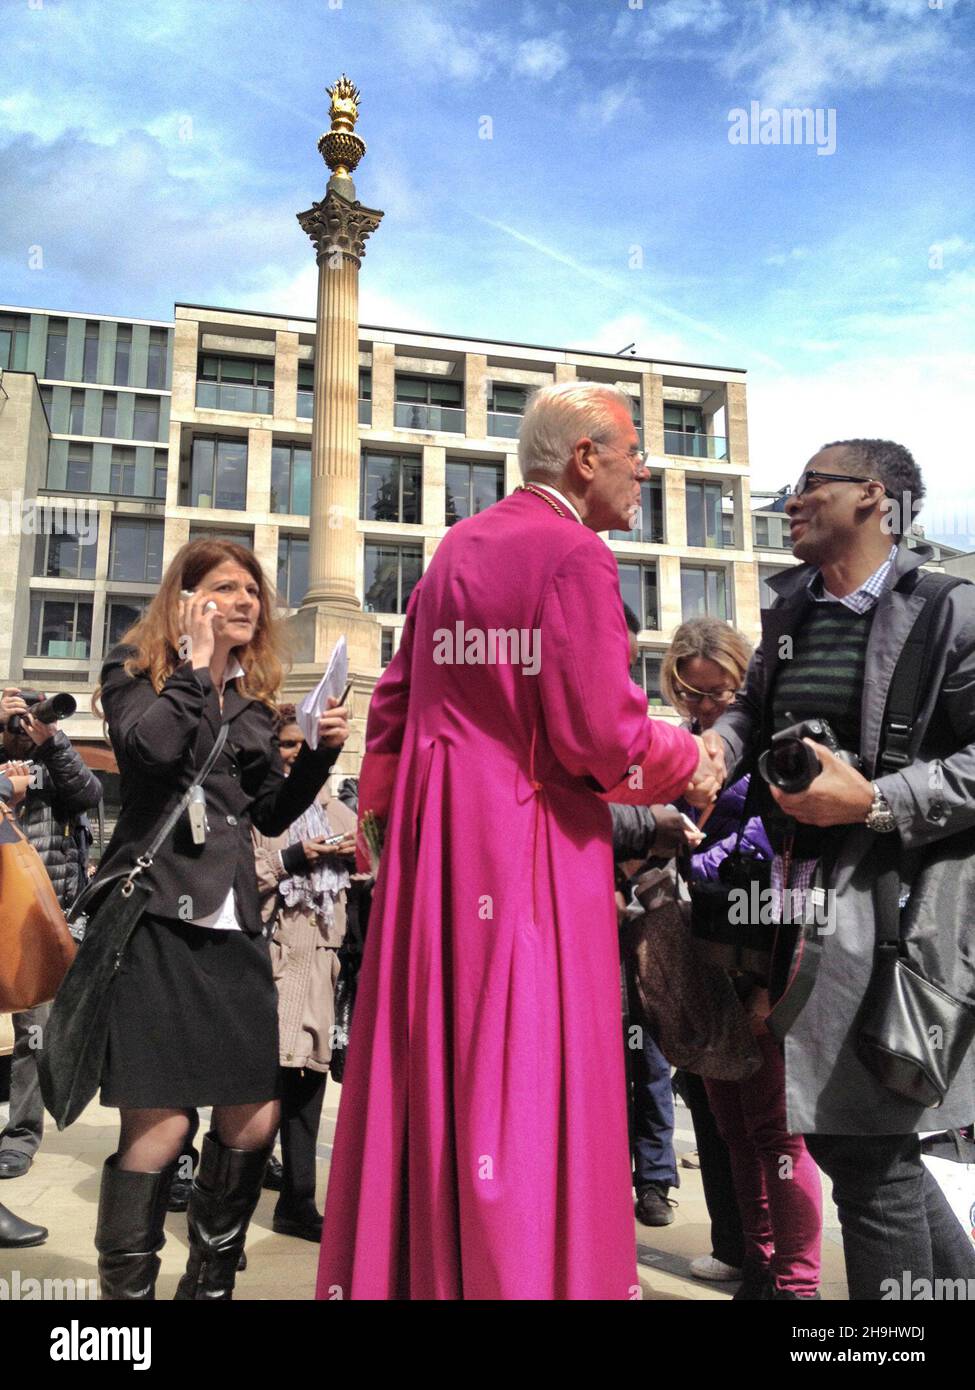 Bishop Michael John Colclough, the Canon Pastor of St Paul's Cathedral being interviewed after the funeral of Baroness Thatcher. Picture taken and edited on the iPhone camera with Snapseed Stock Photo